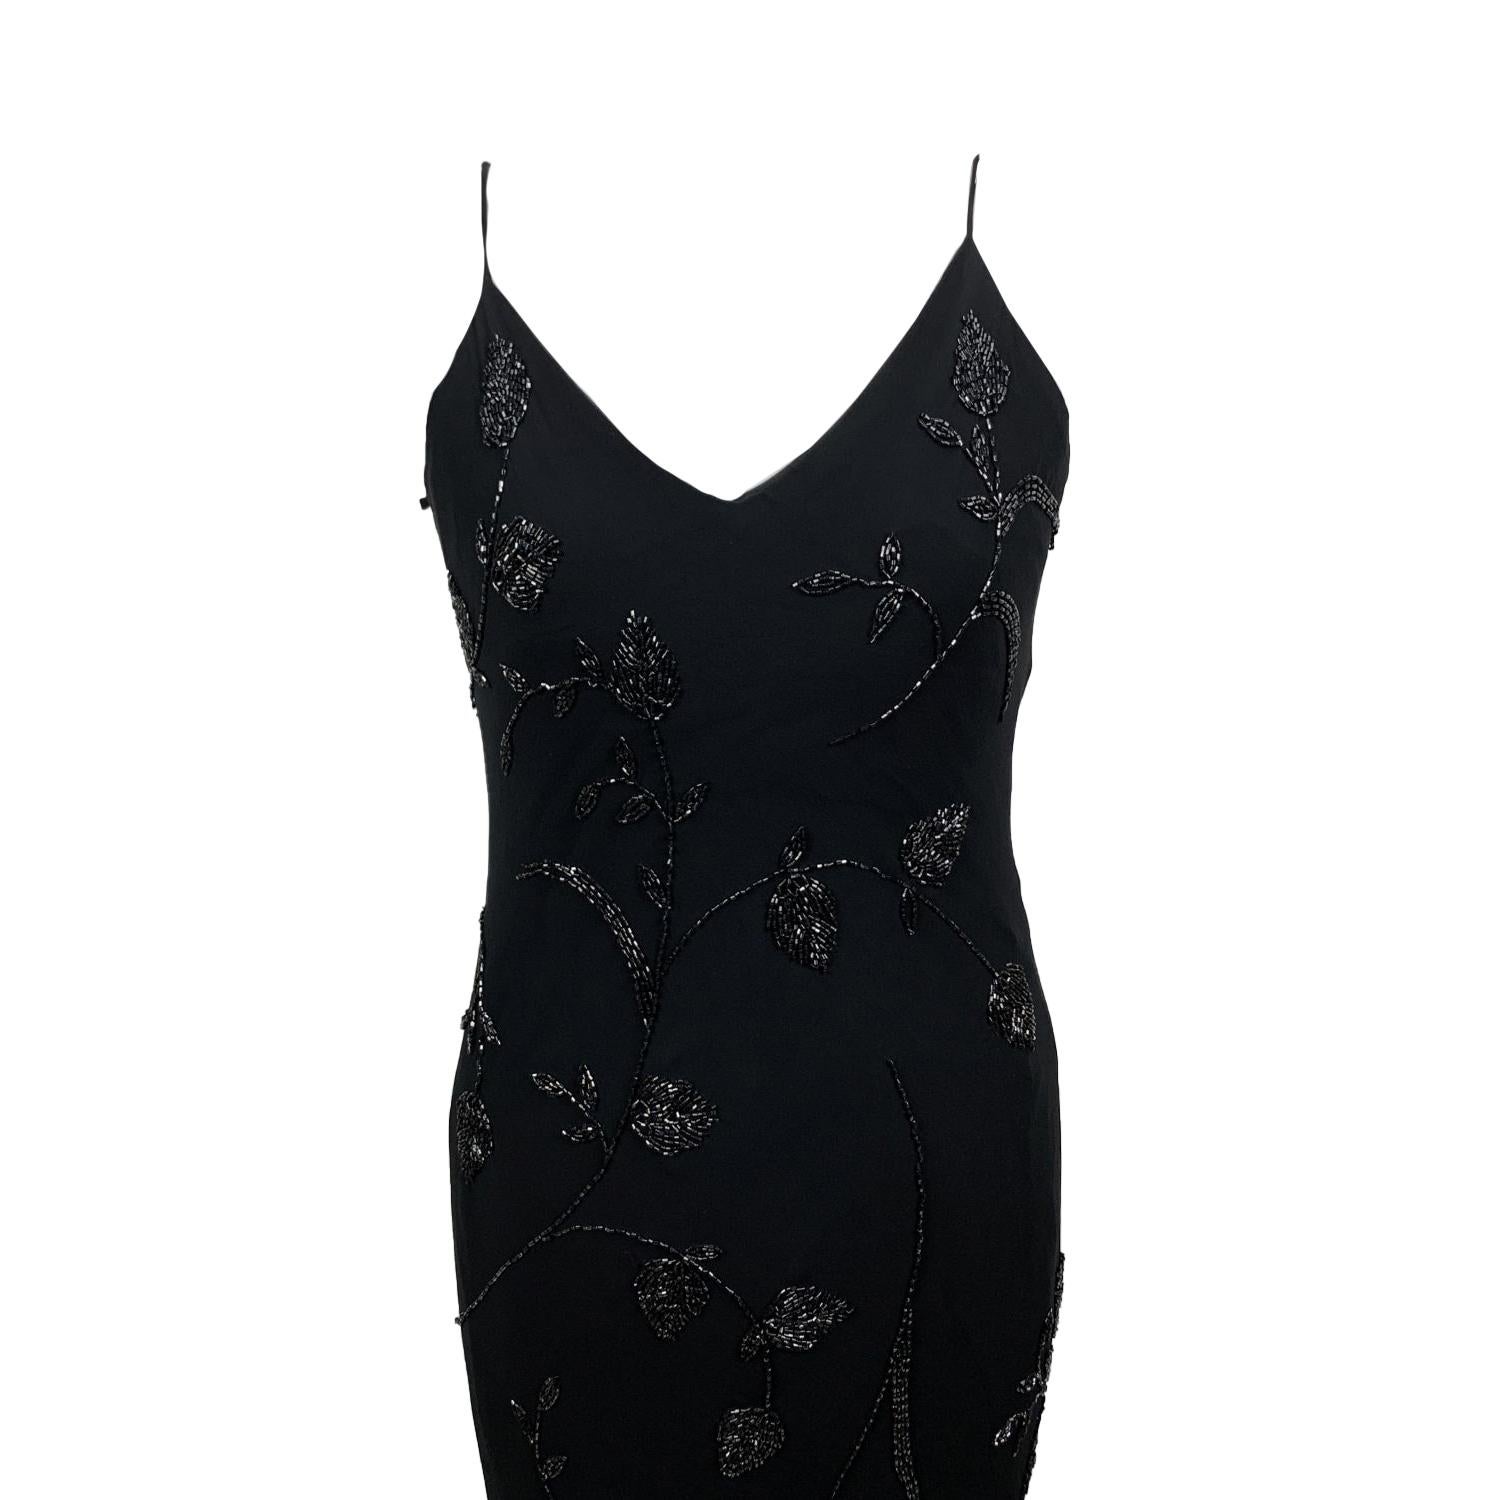 Gorgeous full length chiffon gown in black color, by Les Copains. Beautiful floral beading. It features spaghetti straps and a scoop neckline and back. Rear zip closure with hook and eye. Size: 48 IT (it should correspond to a Large